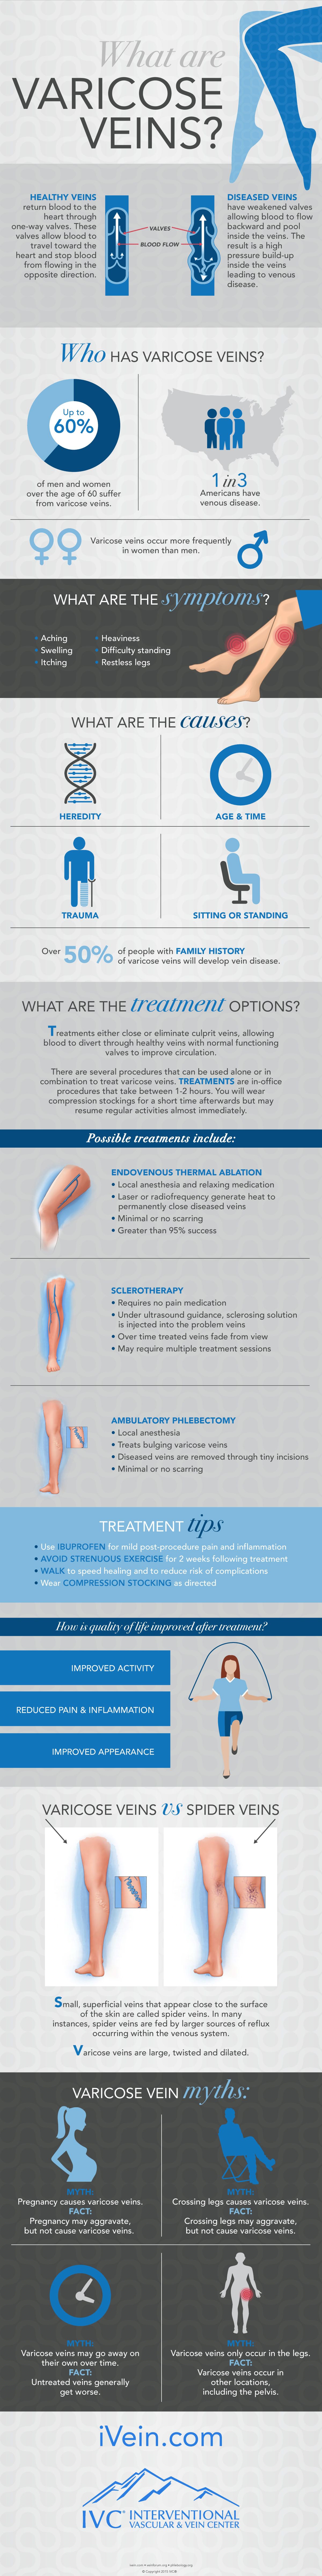 infographic describing the diagnosis and treatment of varicose veins